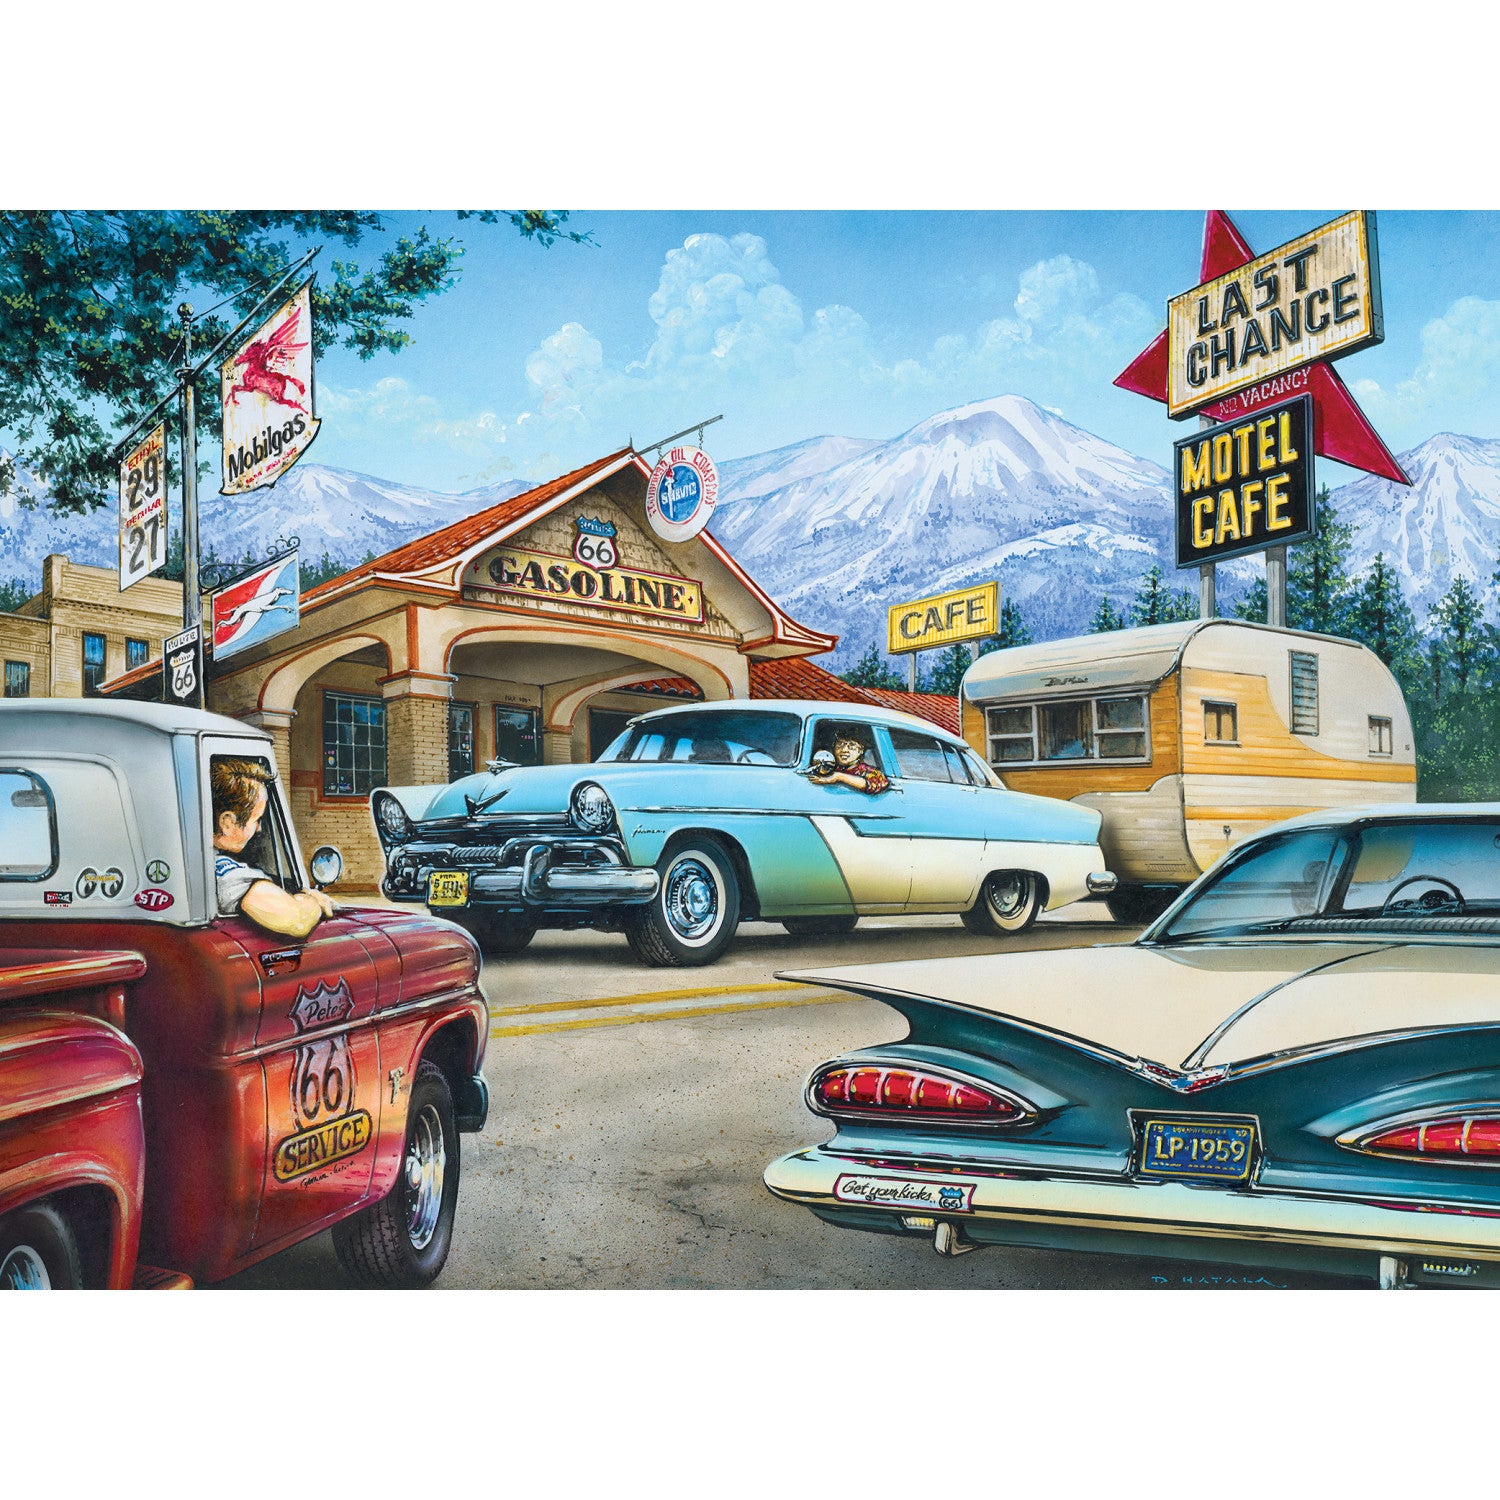 Cruisin' Rt 66 - On the Road Again 1000 Piece Puzzle